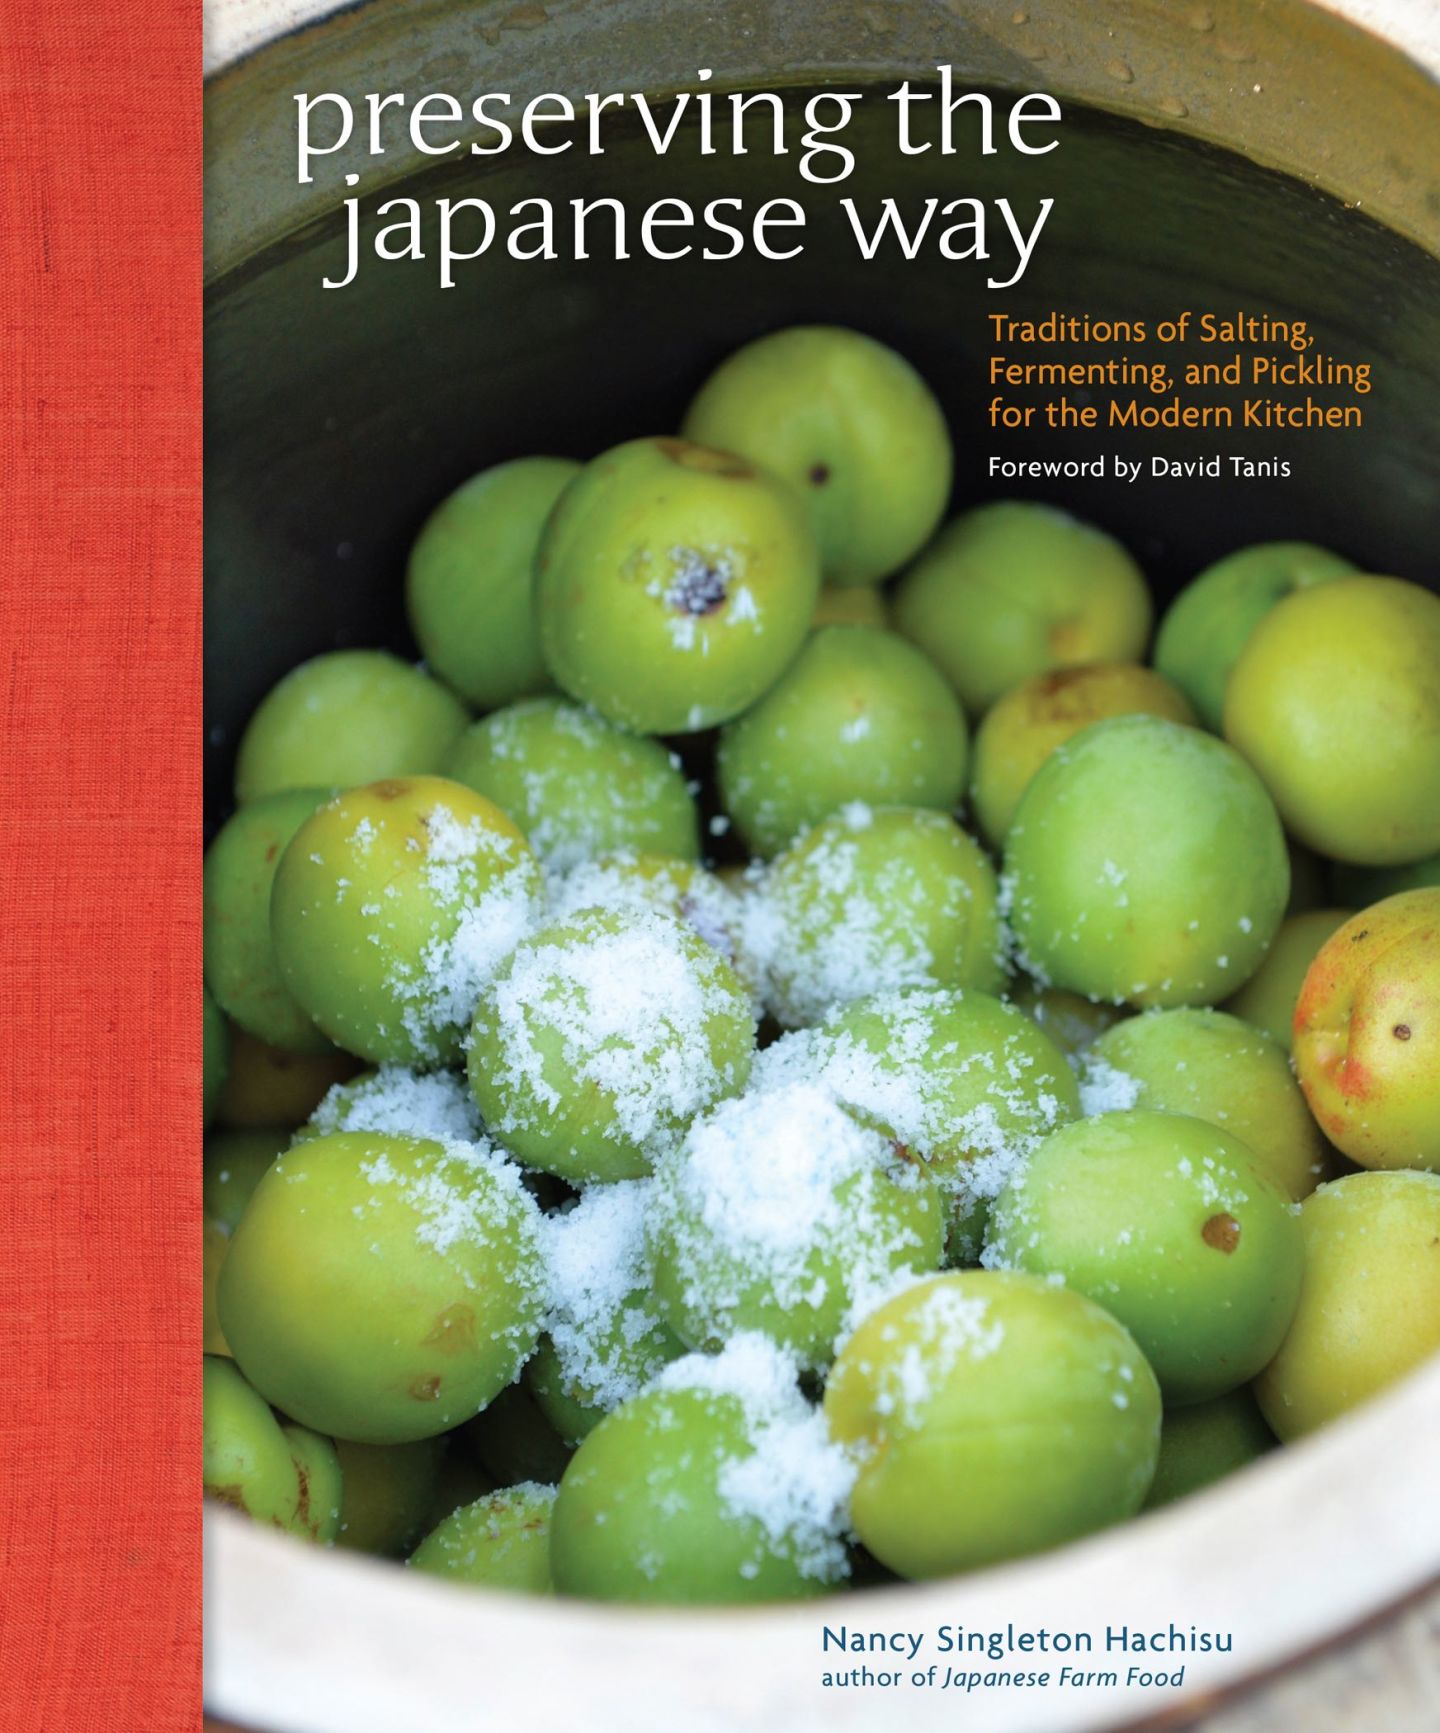 Preserving the Japanese Way: Traditions of Salting, Fermenting, and Pickling for the Modern Kitchen by Nancy Singleton Hachisu